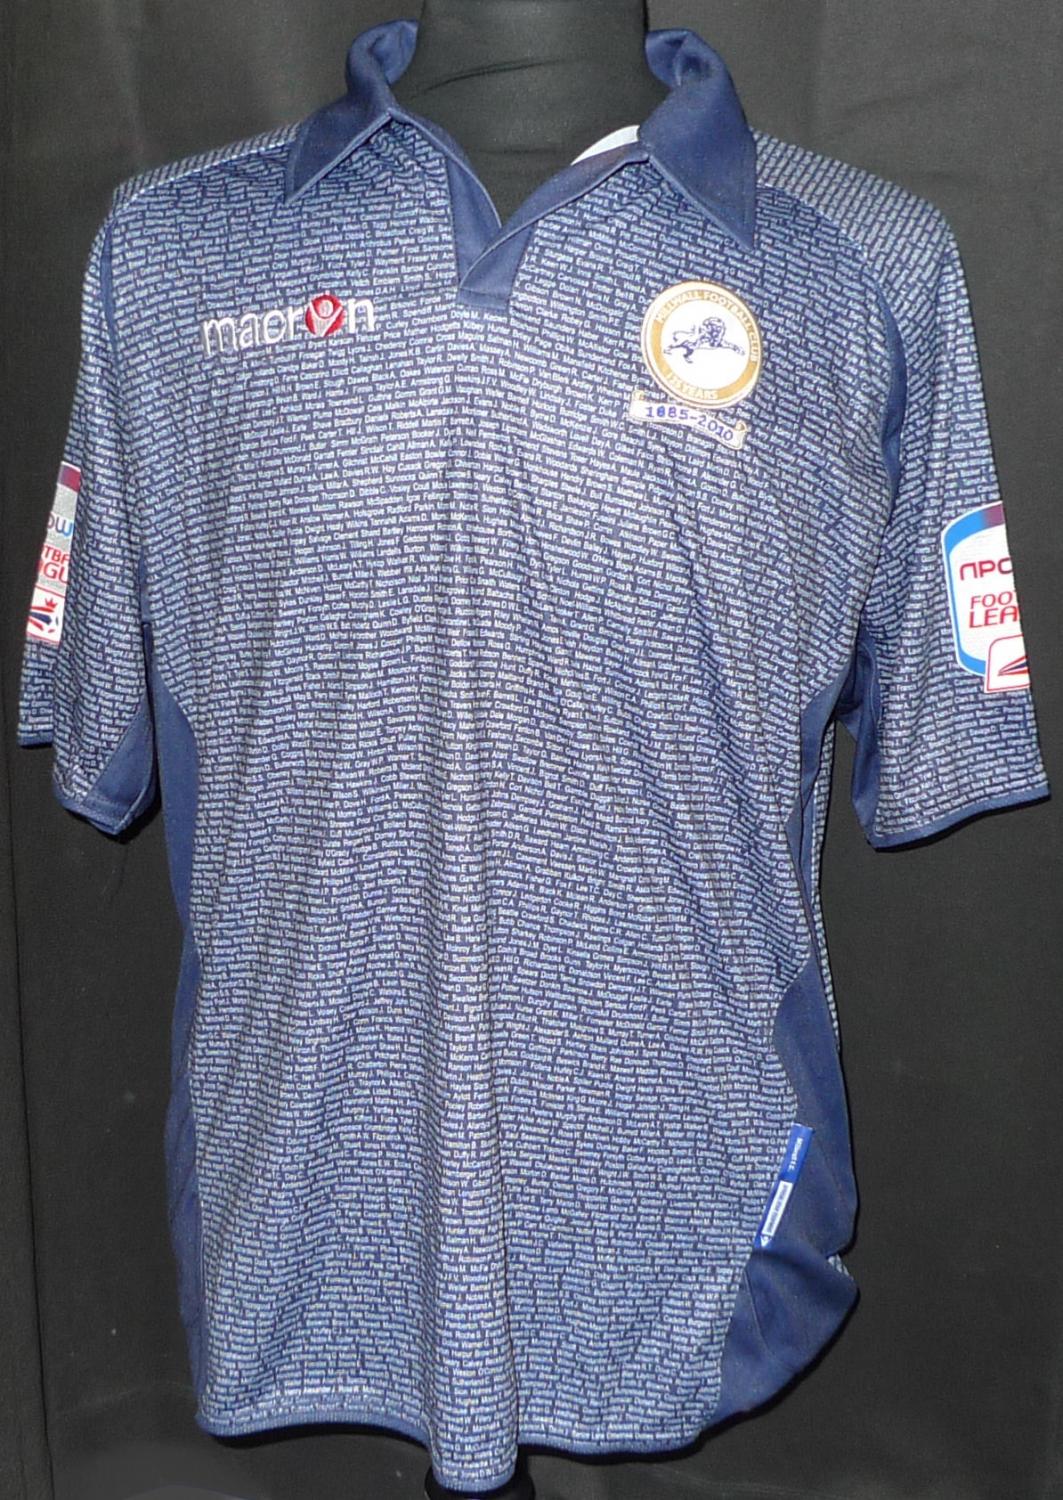 maillot millwall fc particulier 2010-2011 pas cher